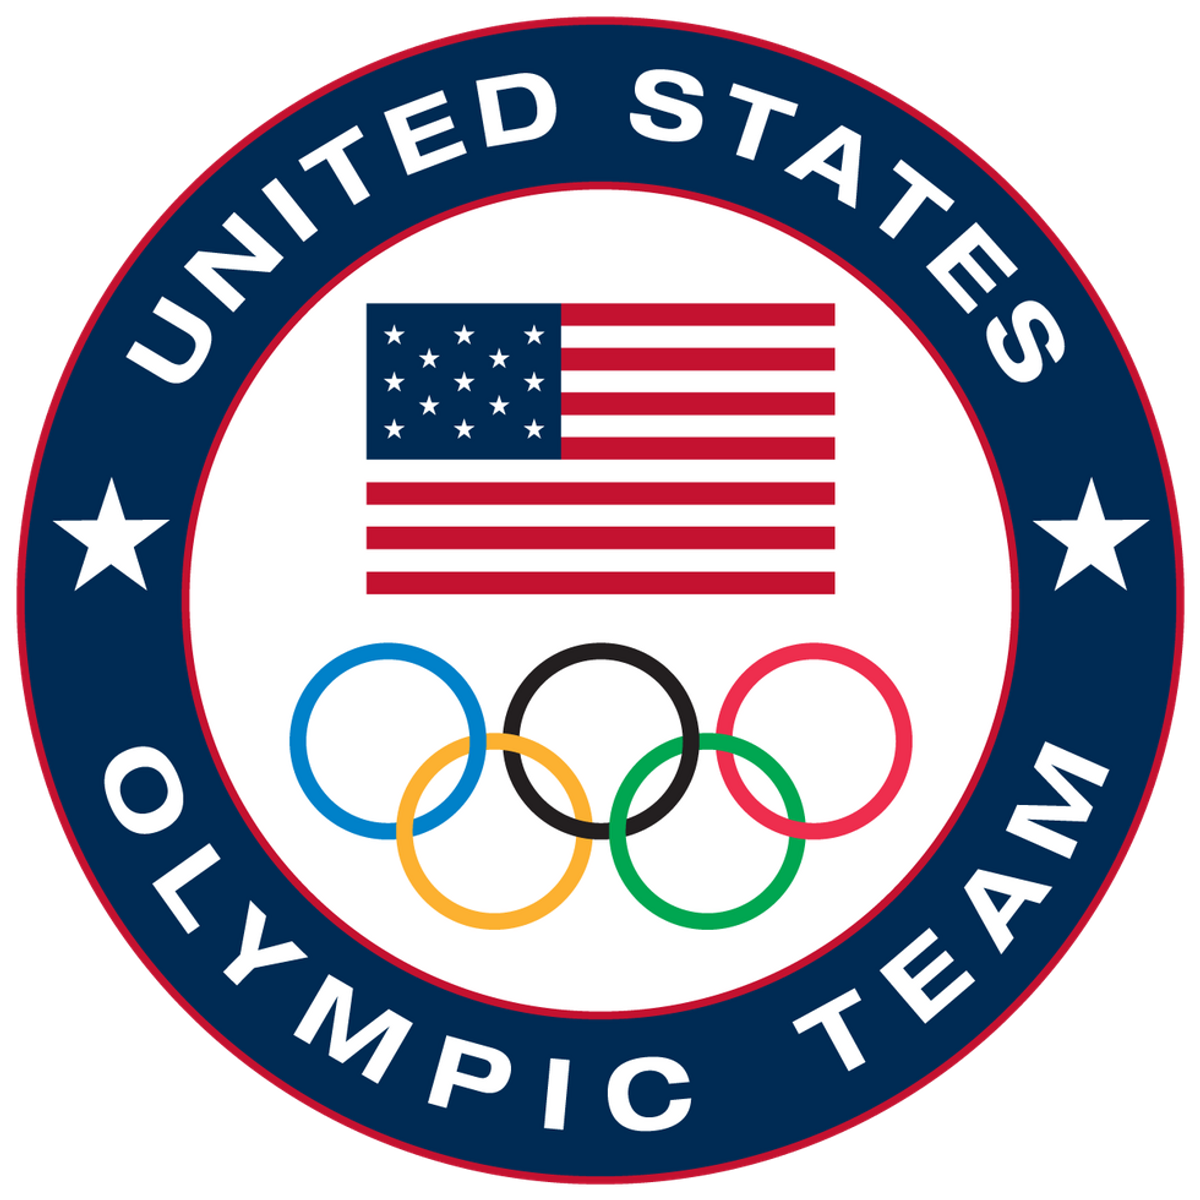 USA Final Medal Count For The 2016 Rio Olympic Games